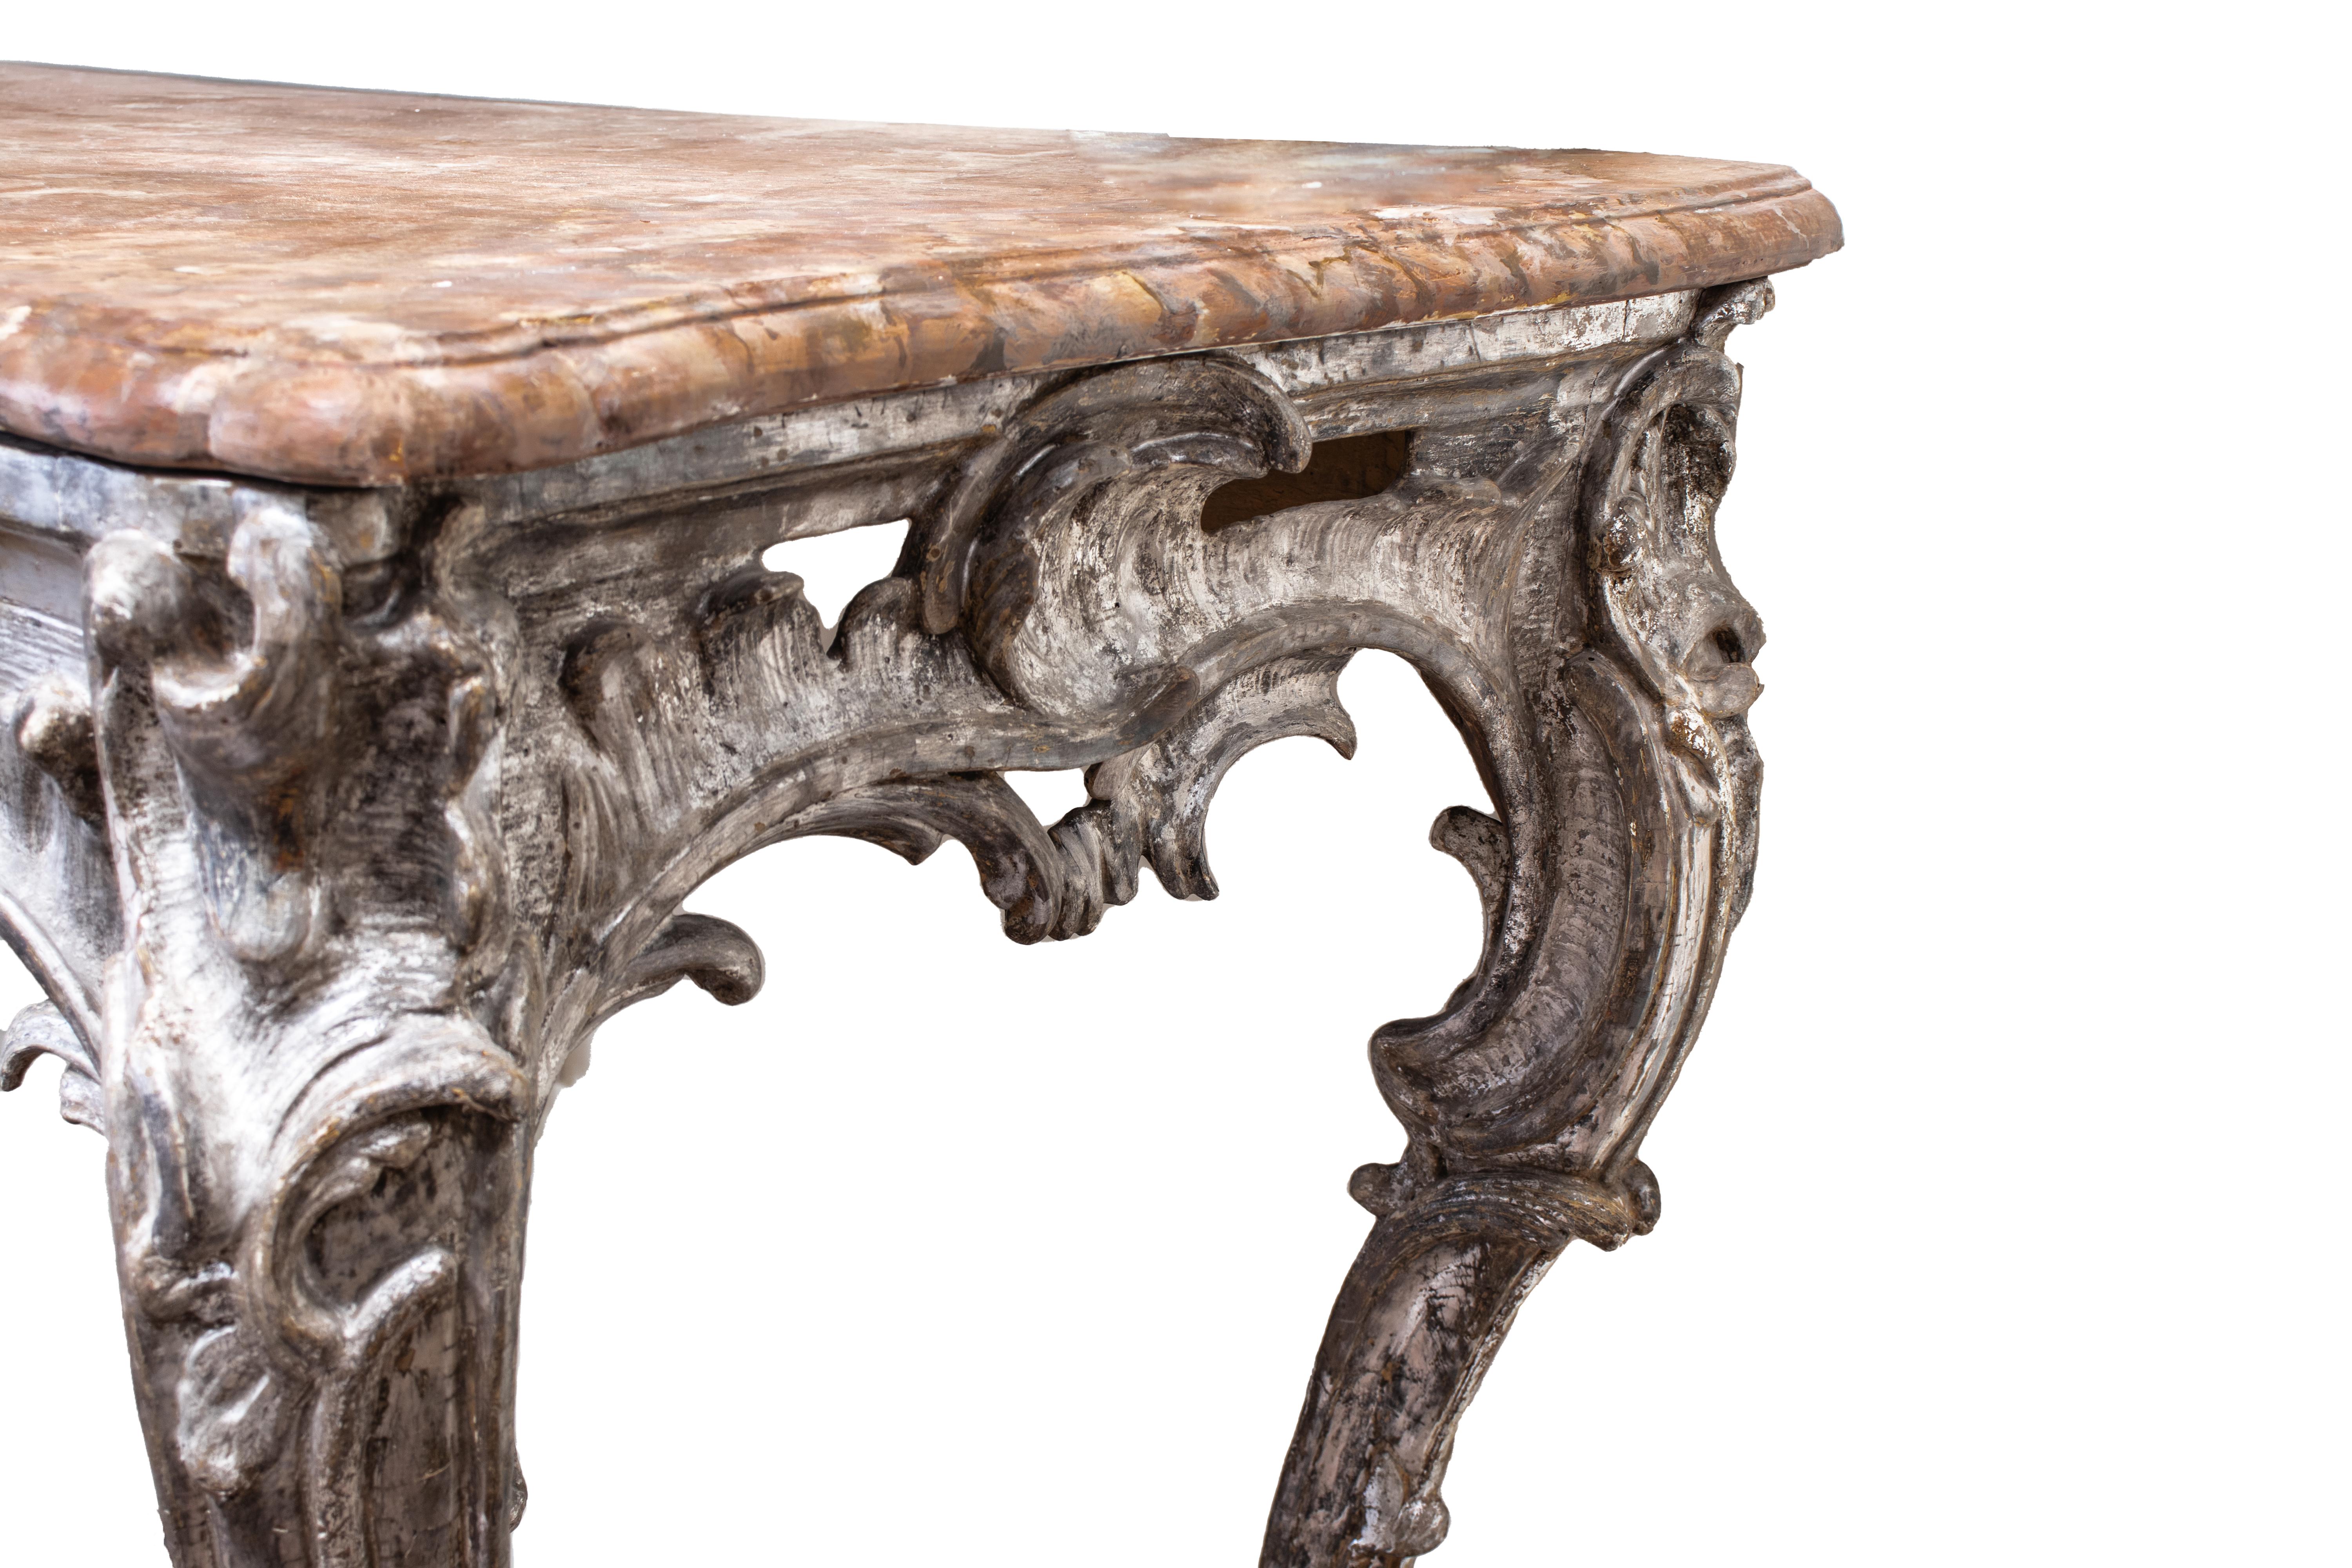 South German mid-18th-century carved wood console in Rococo style. The curved feet are adorned with rocaille scrolls and foliage motifs, and the frame is decorated with a massive floral element at the center. The console base is entirely silvered,